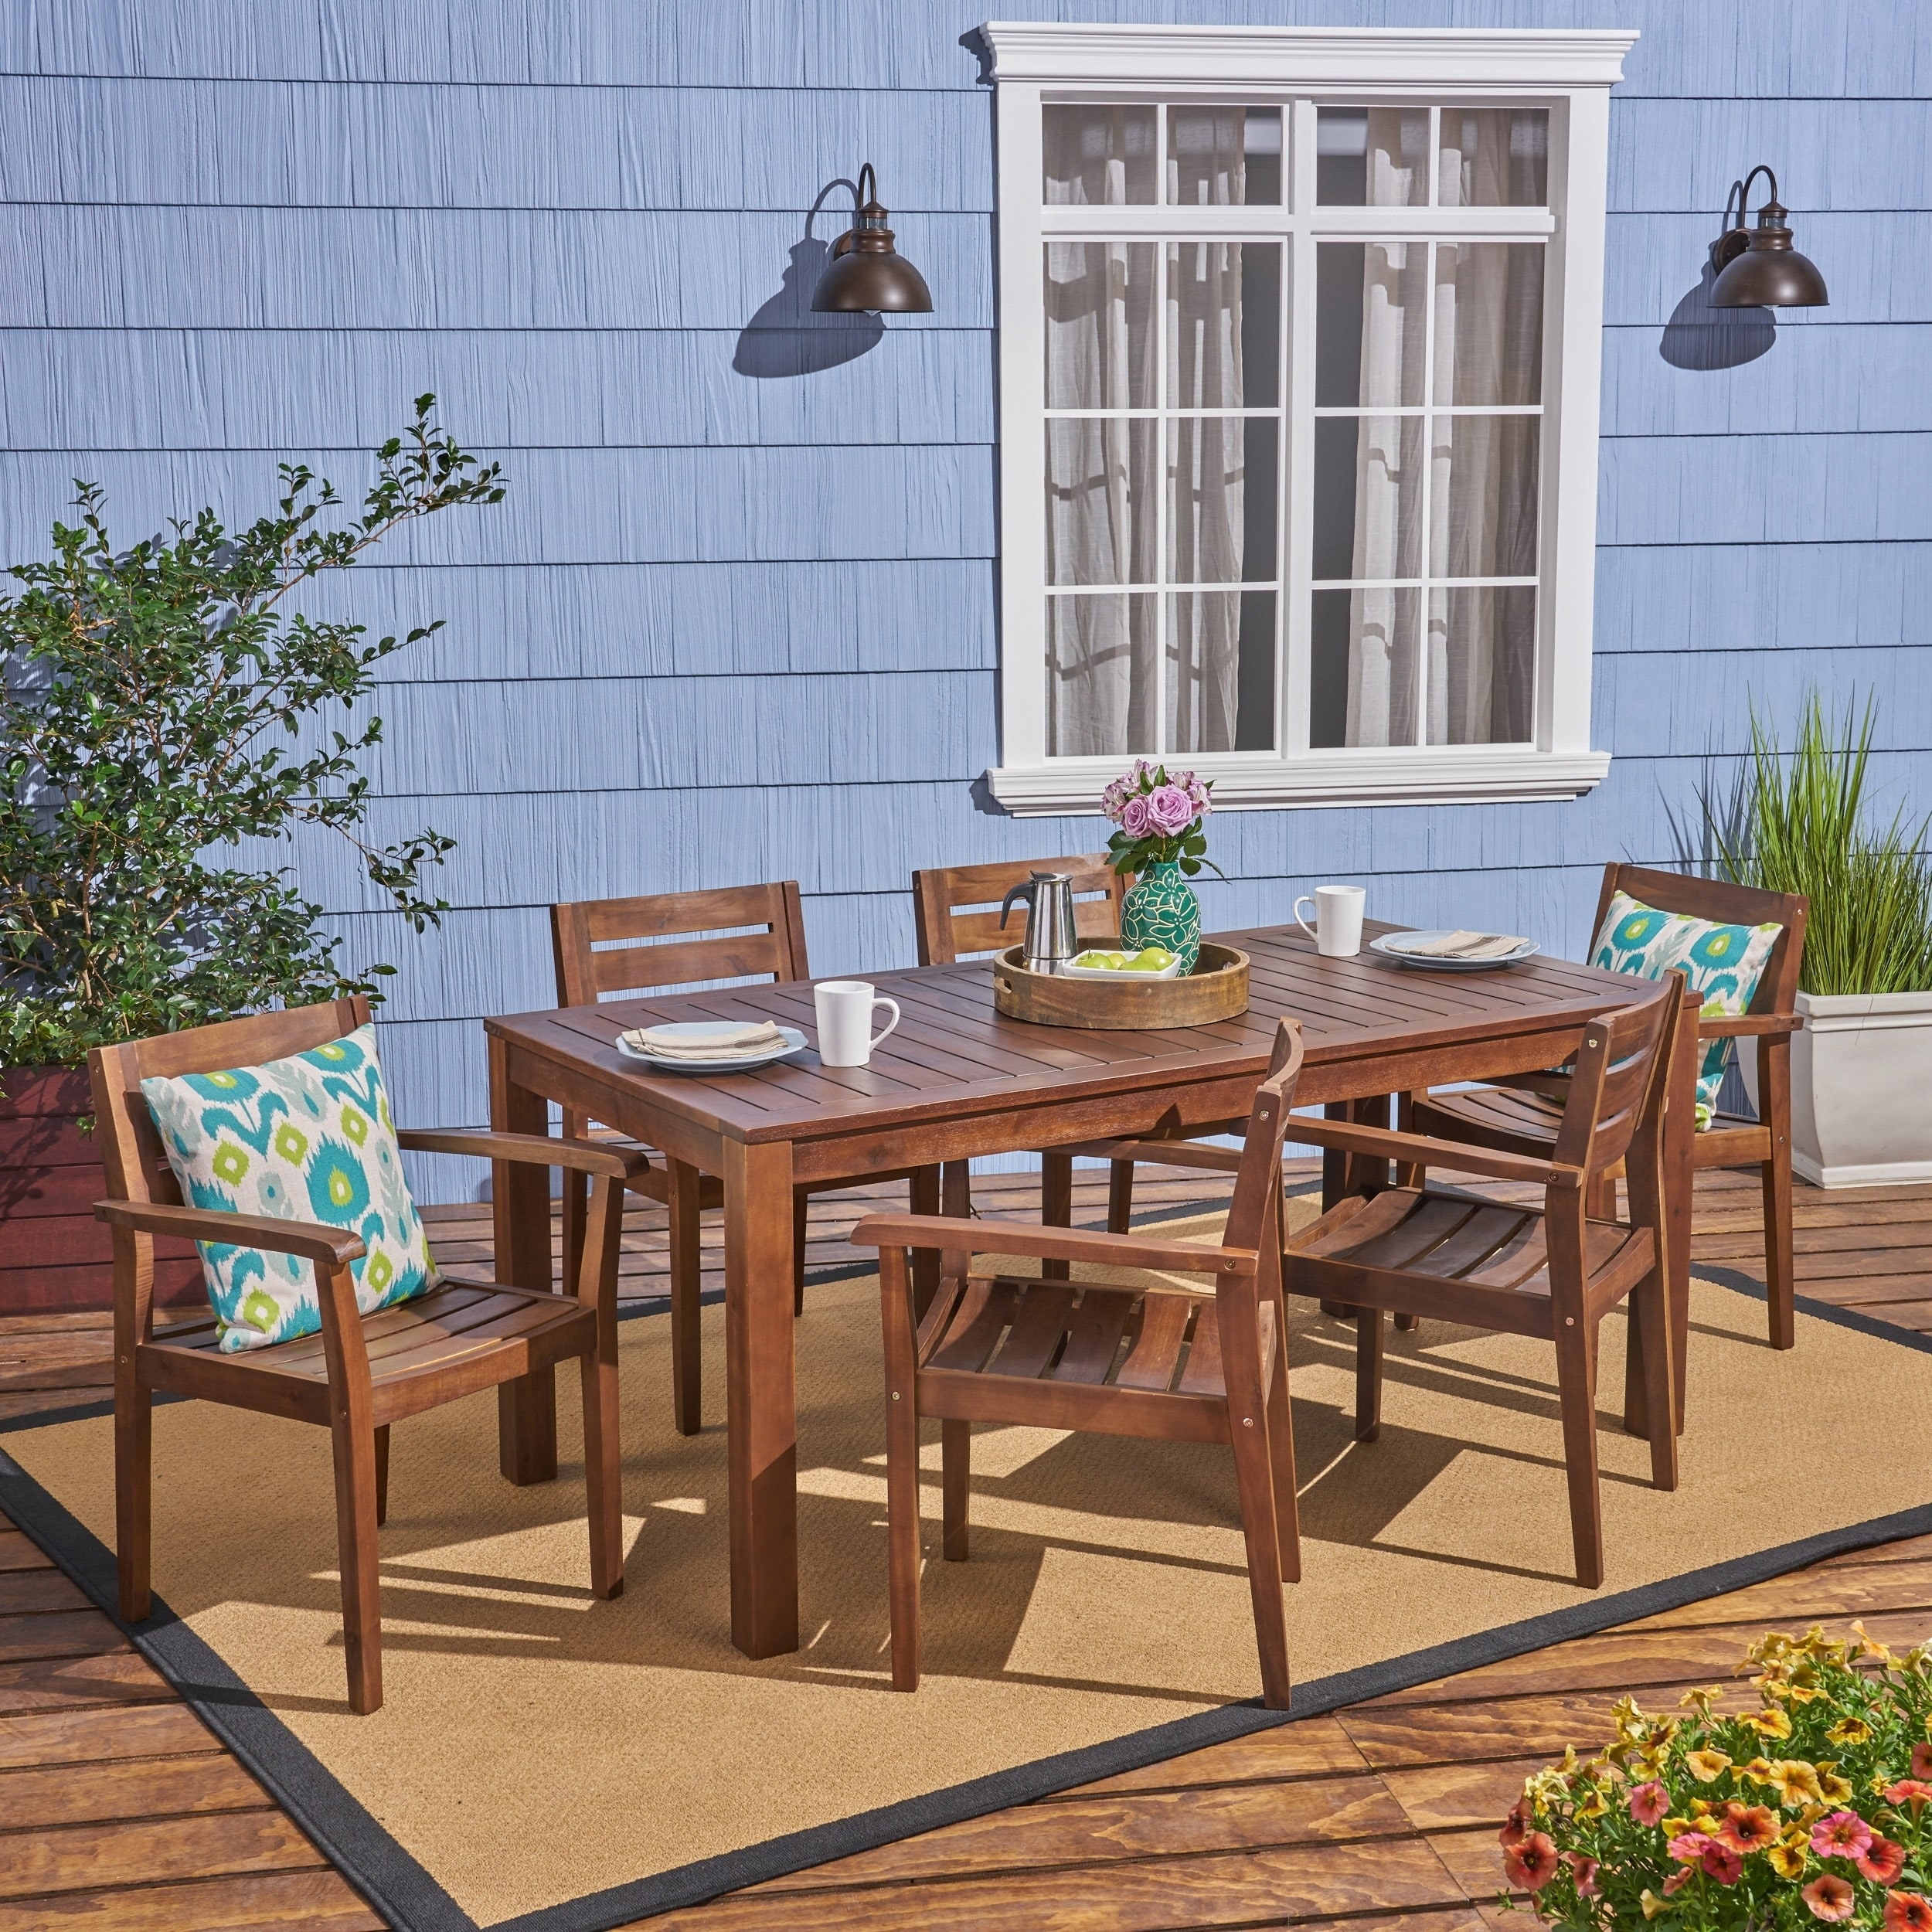 Magnolia Outdoor Rustic Acacia Wood 7 Piece Dining Set By Christopher Knight Home